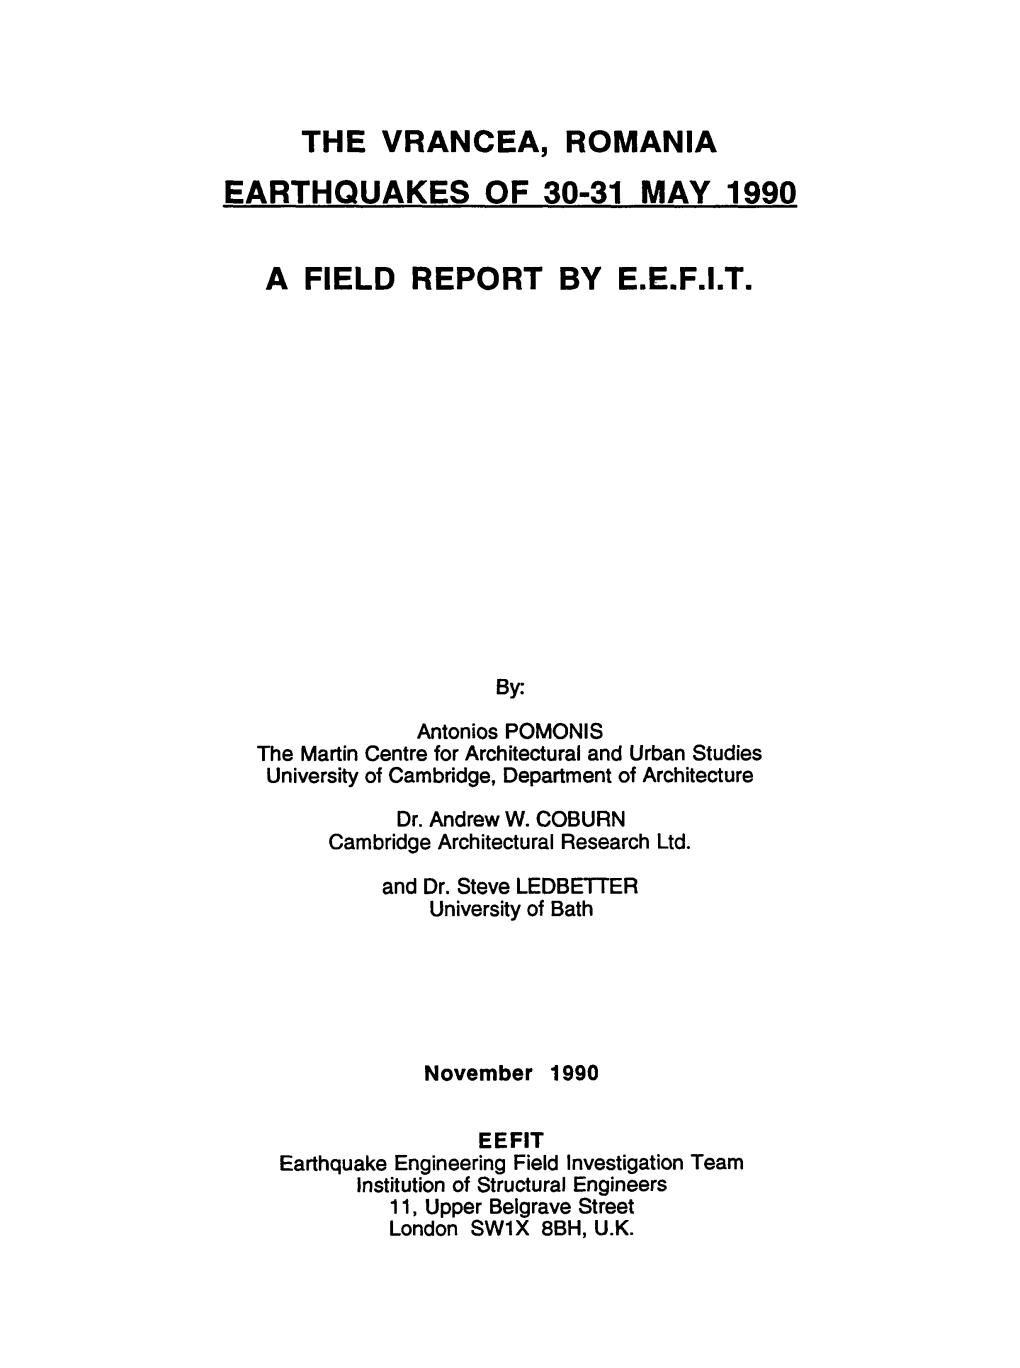 The Vrancea, Romania Earthquakes of 30-31 May 1990 a Field Report by Eefit